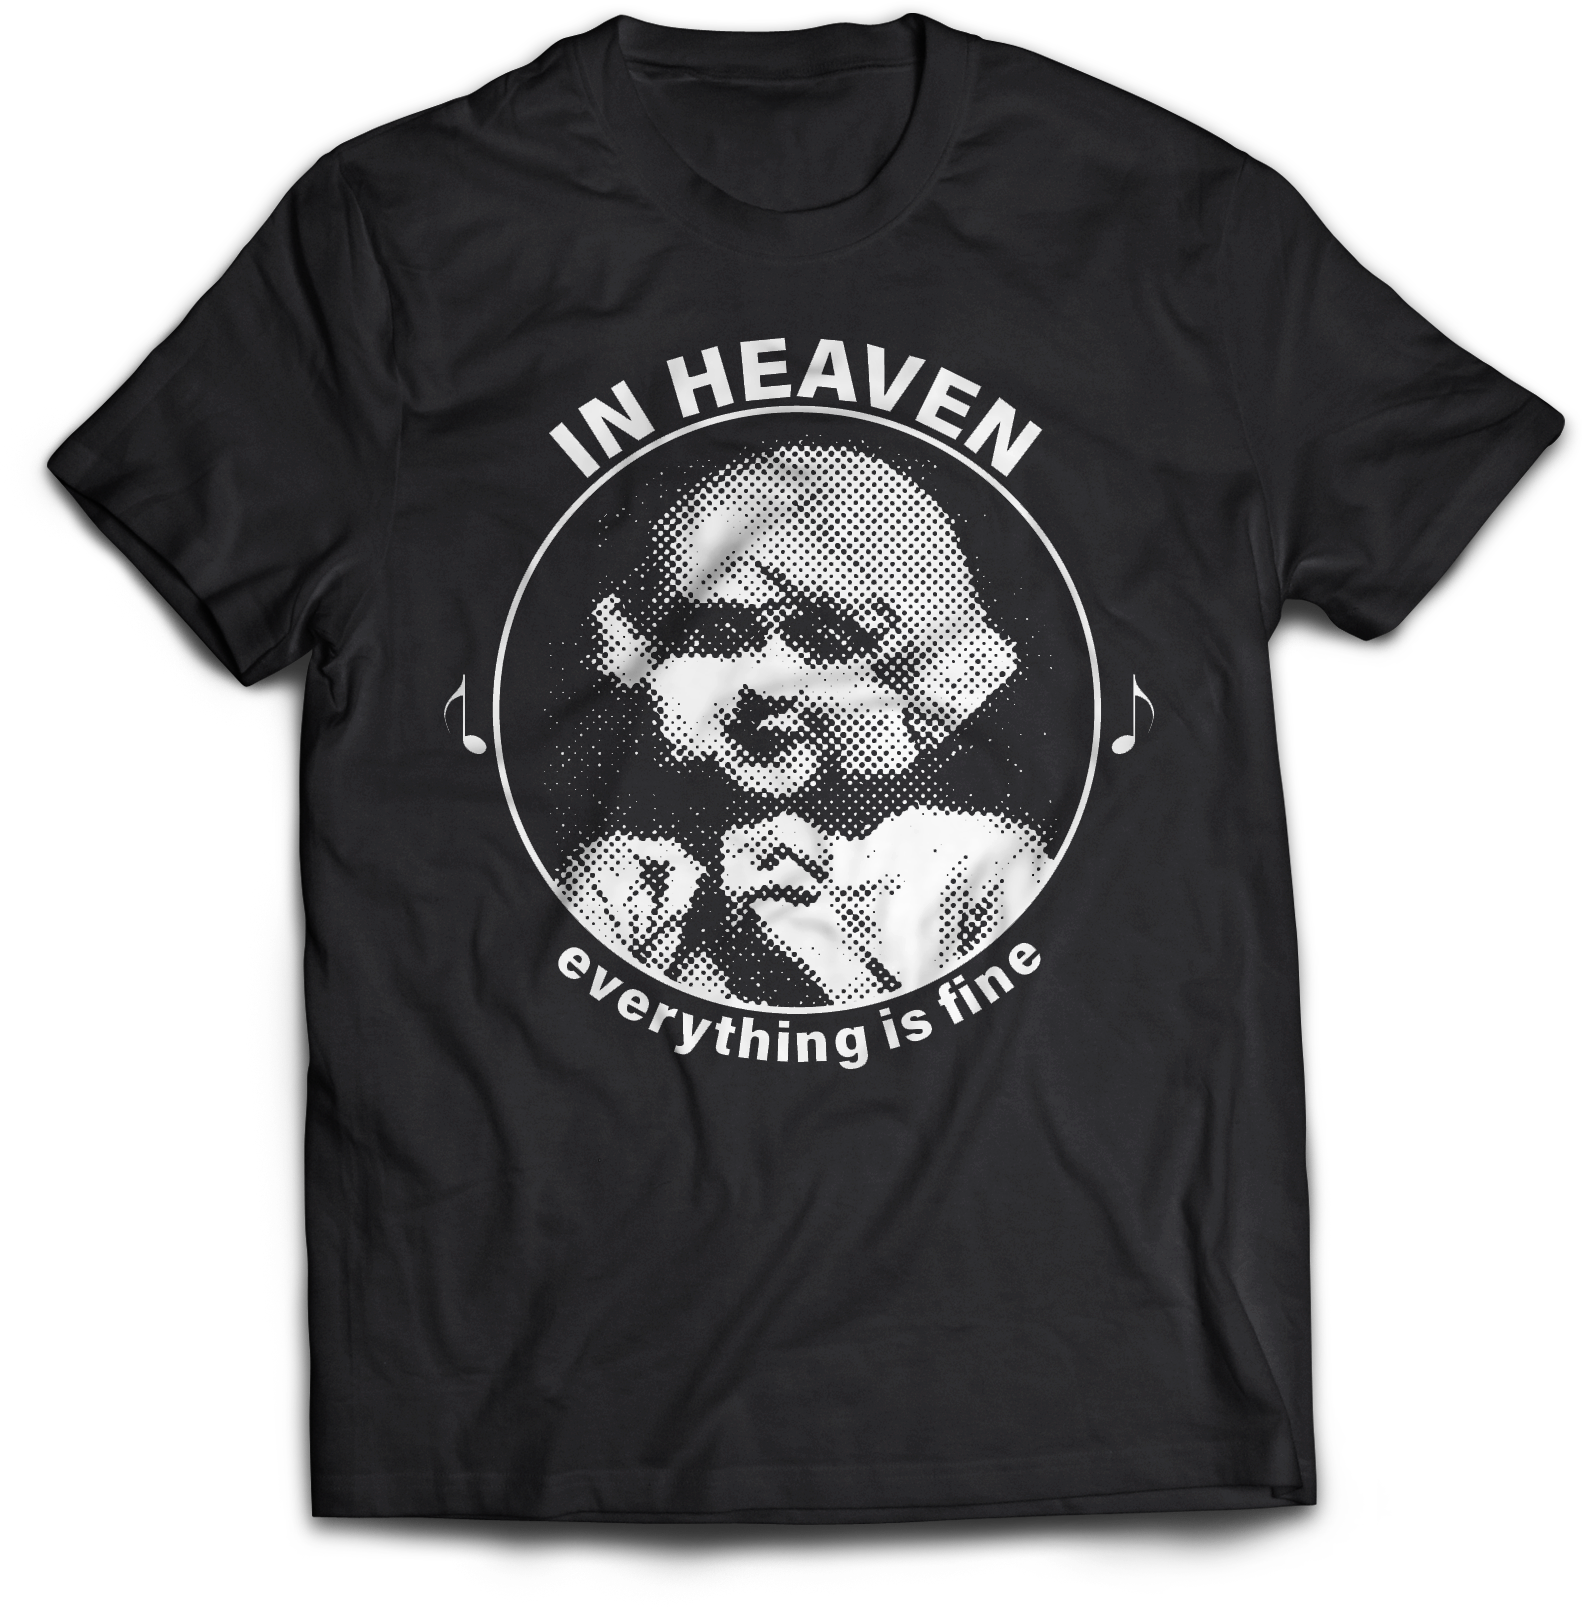 ERASERHEAD: "IN HEAVEN, EVERYTHING IS FINE" T-SHIRT